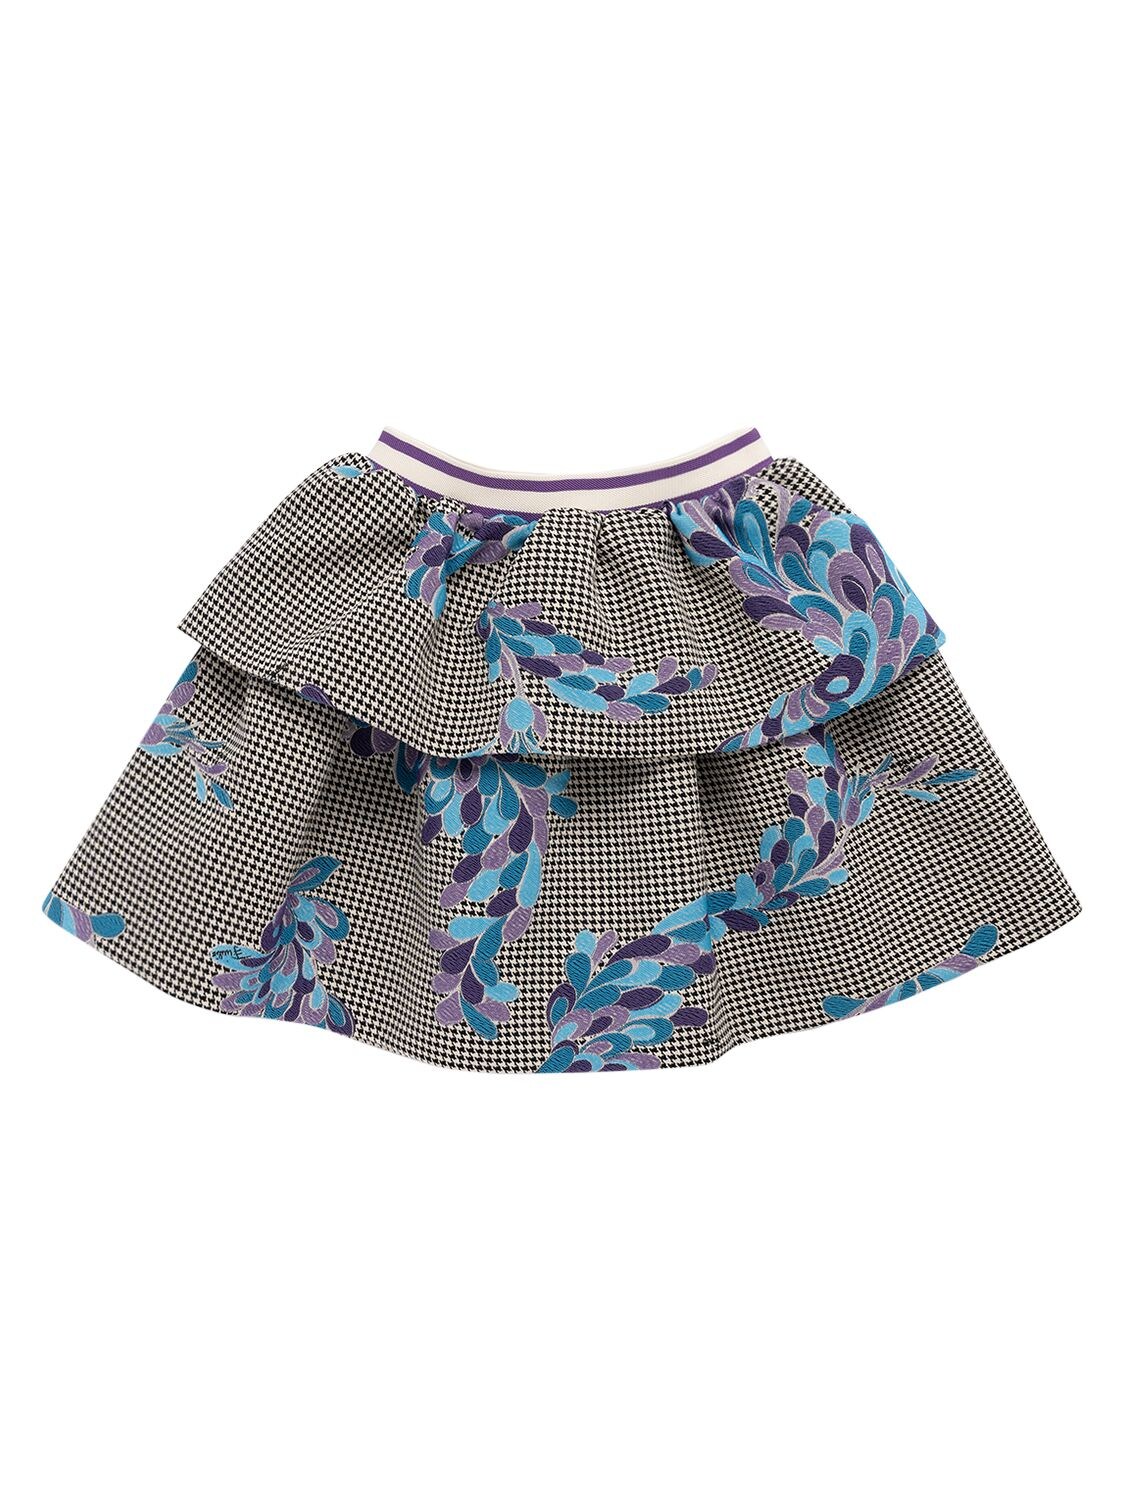 Emilio Pucci Kids' Ruffle Cotton Blend Houndstooth Skirt In Multicolor